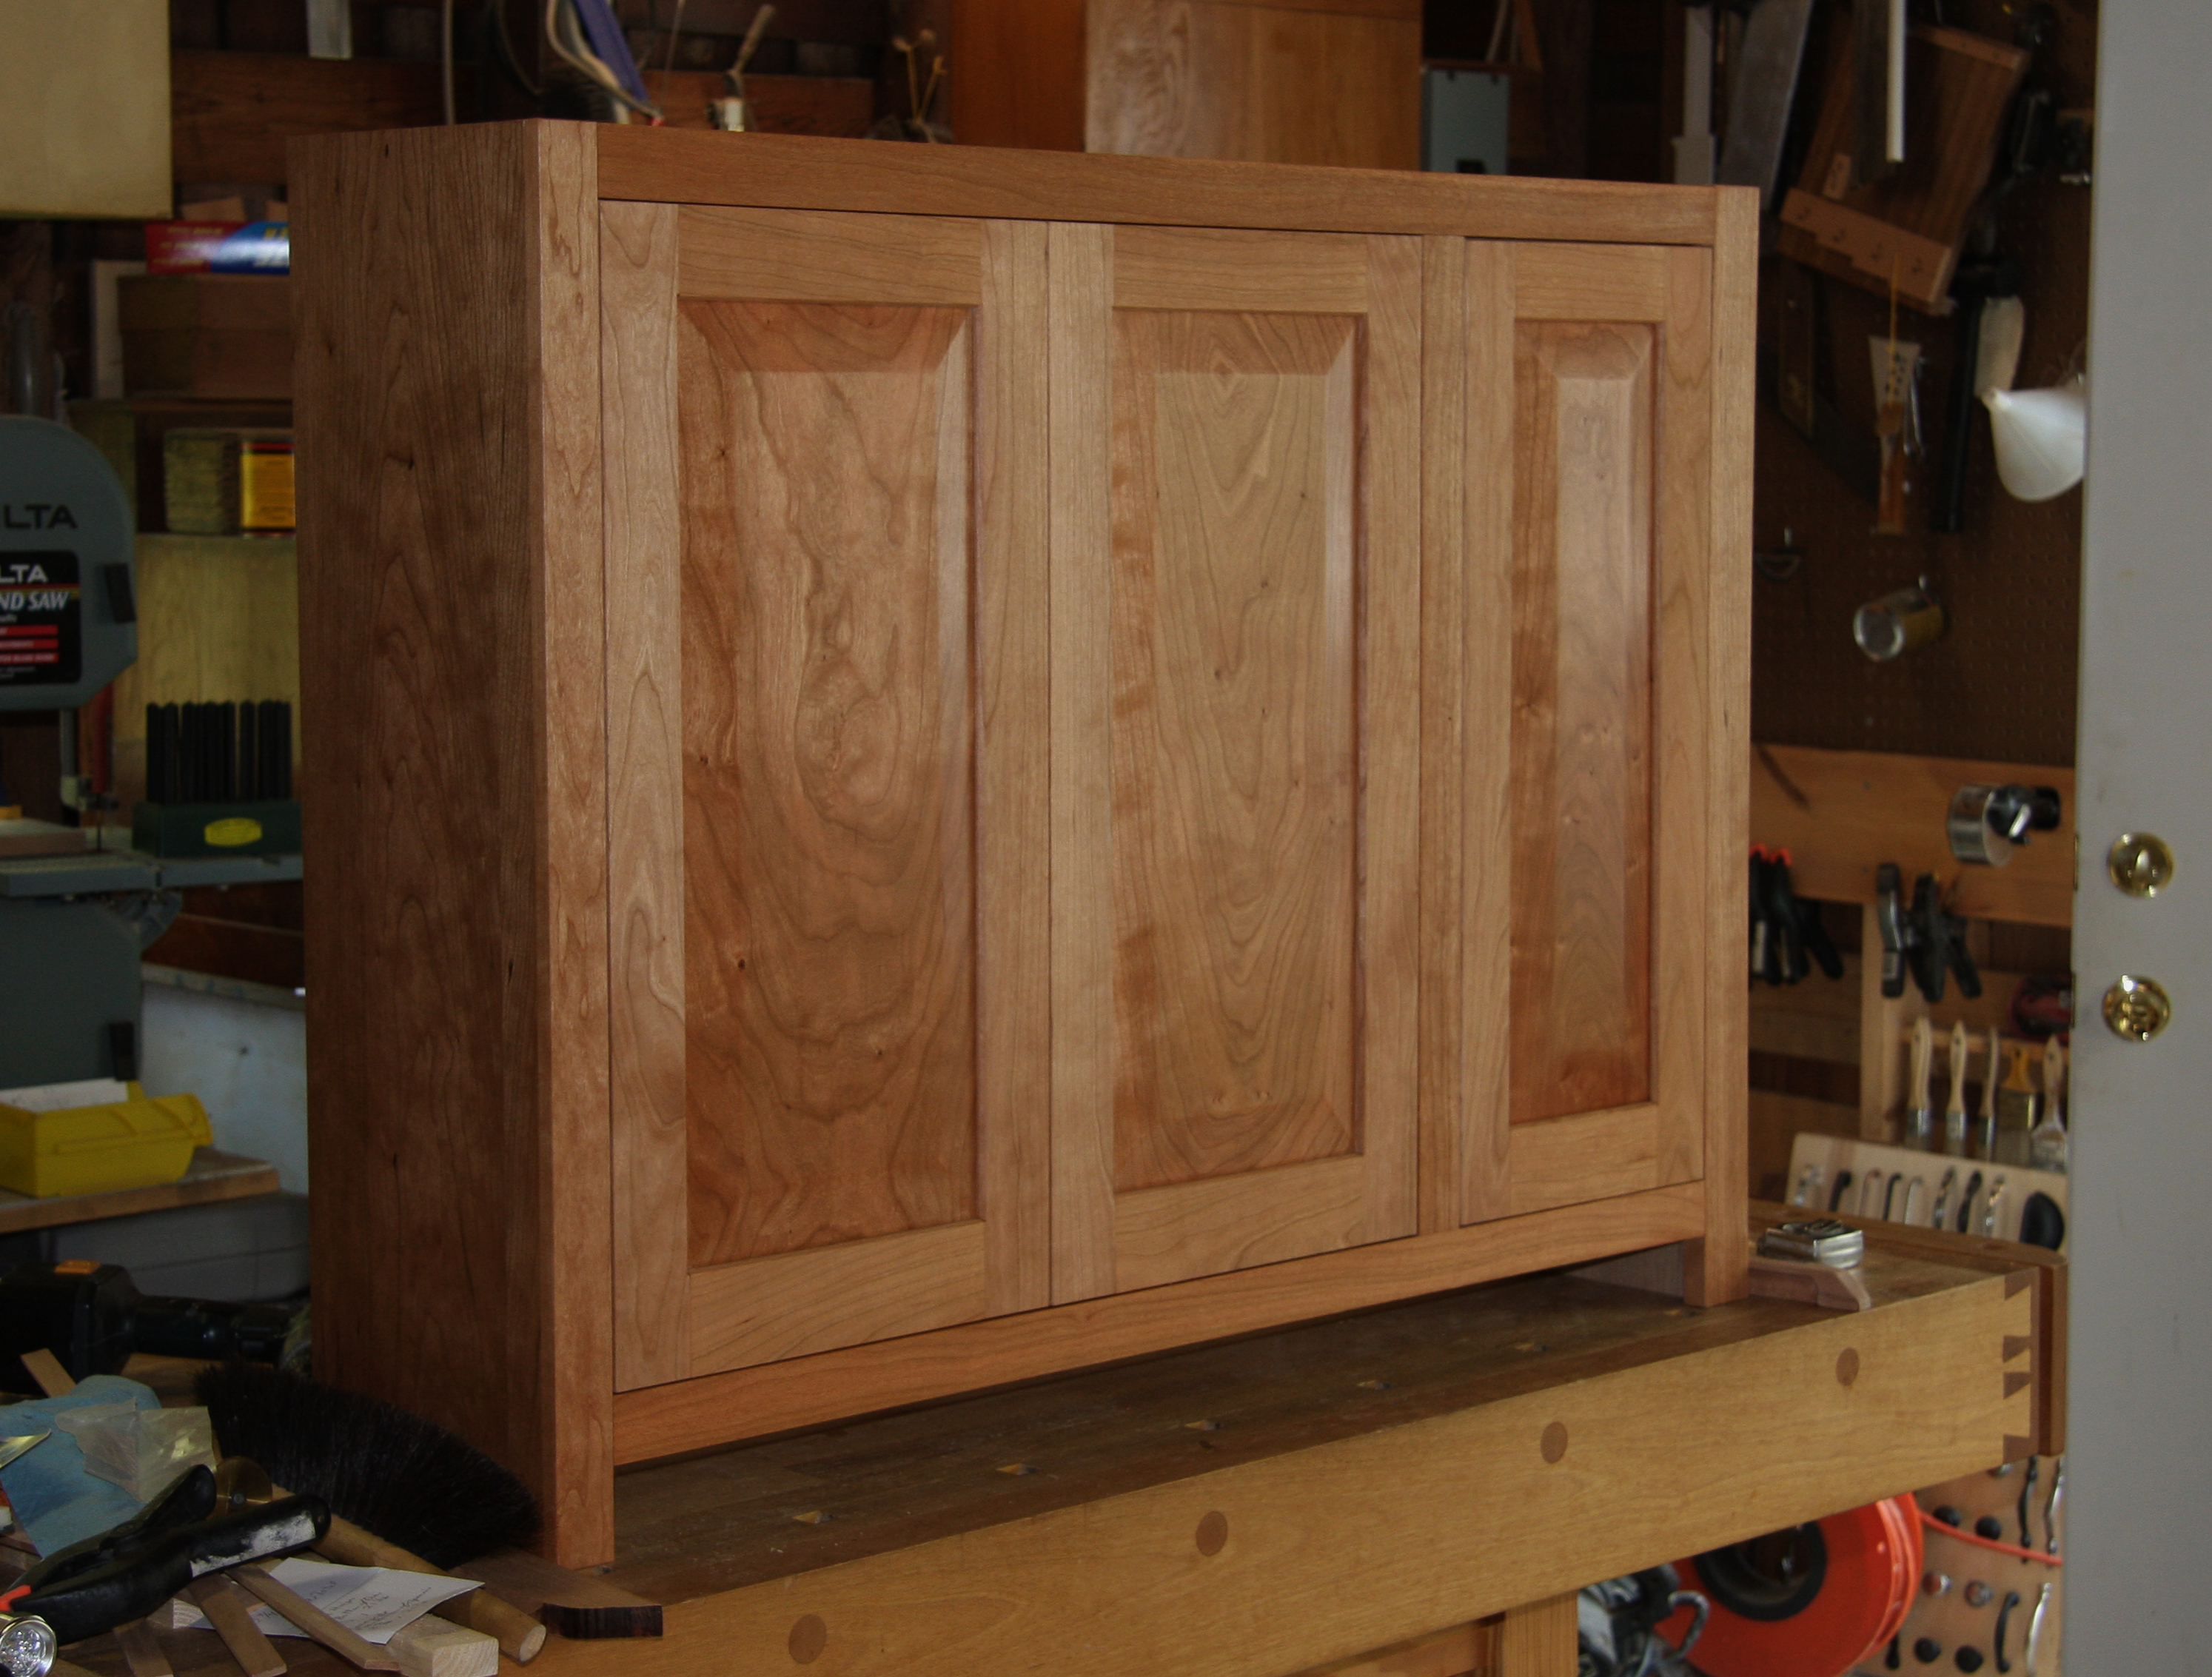 Right base cabinet for library shelf project